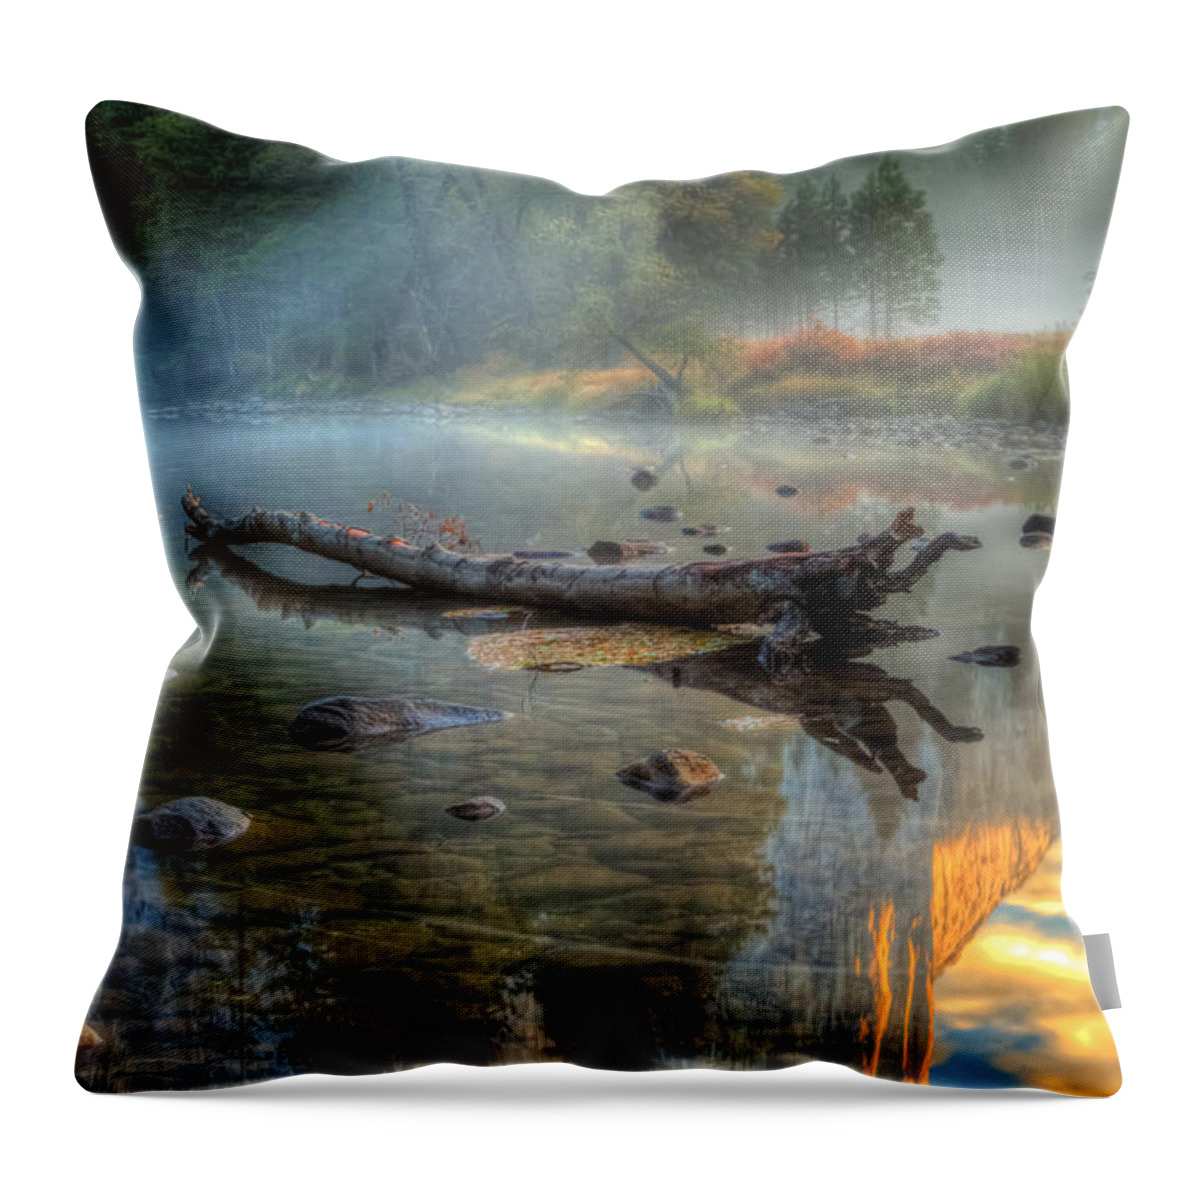 Landscape Throw Pillow featuring the photograph Stranded by Jonathan Nguyen